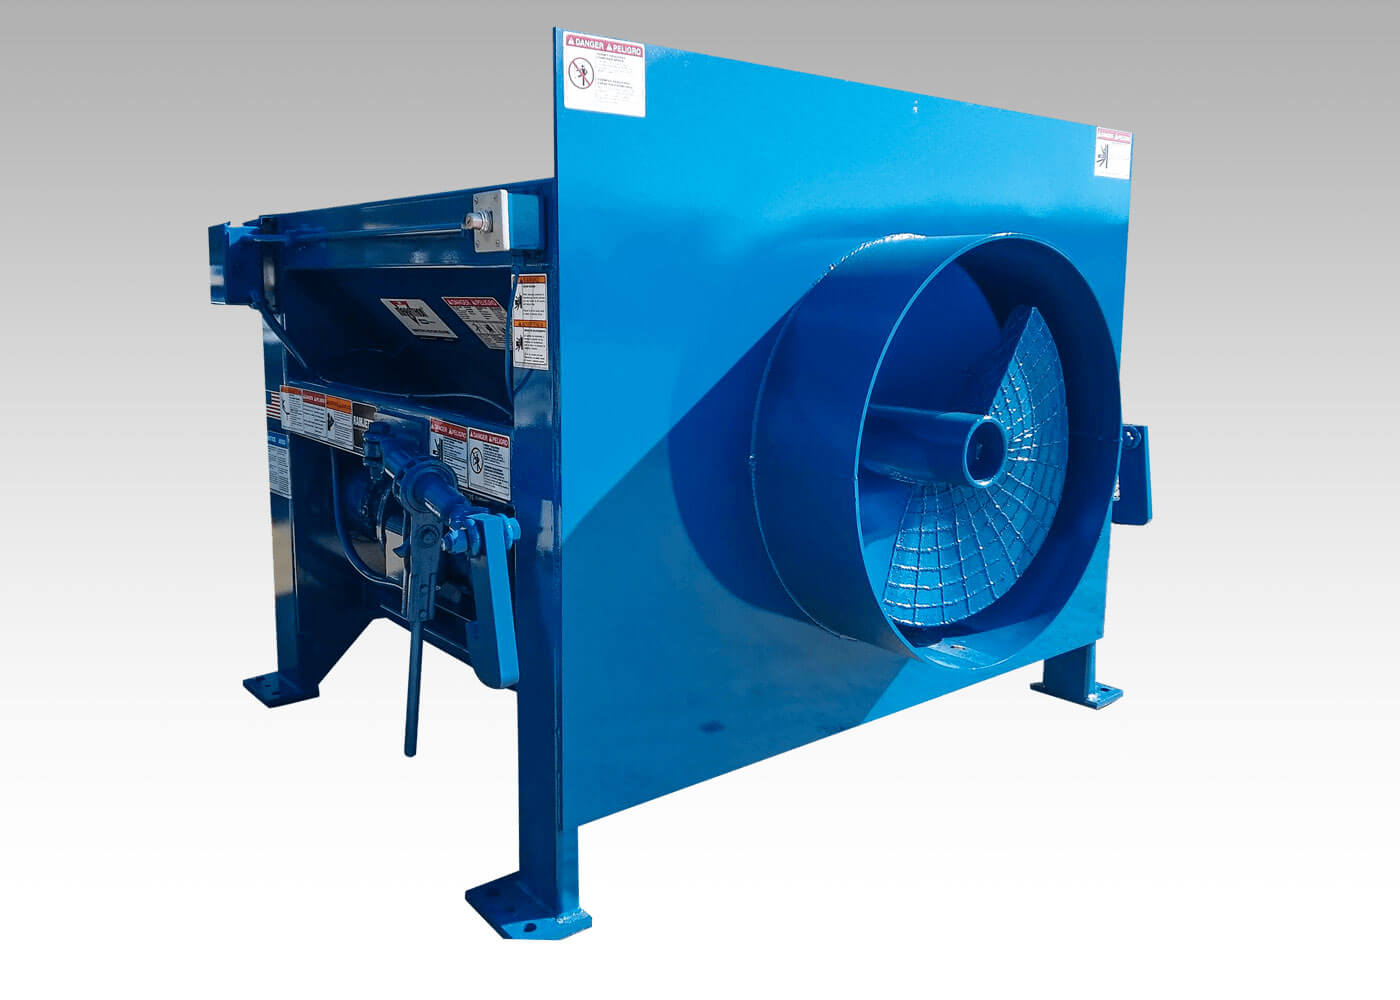 Marathon AST-220 stationary auger trash compactor with auger screw compaction for commercial waste